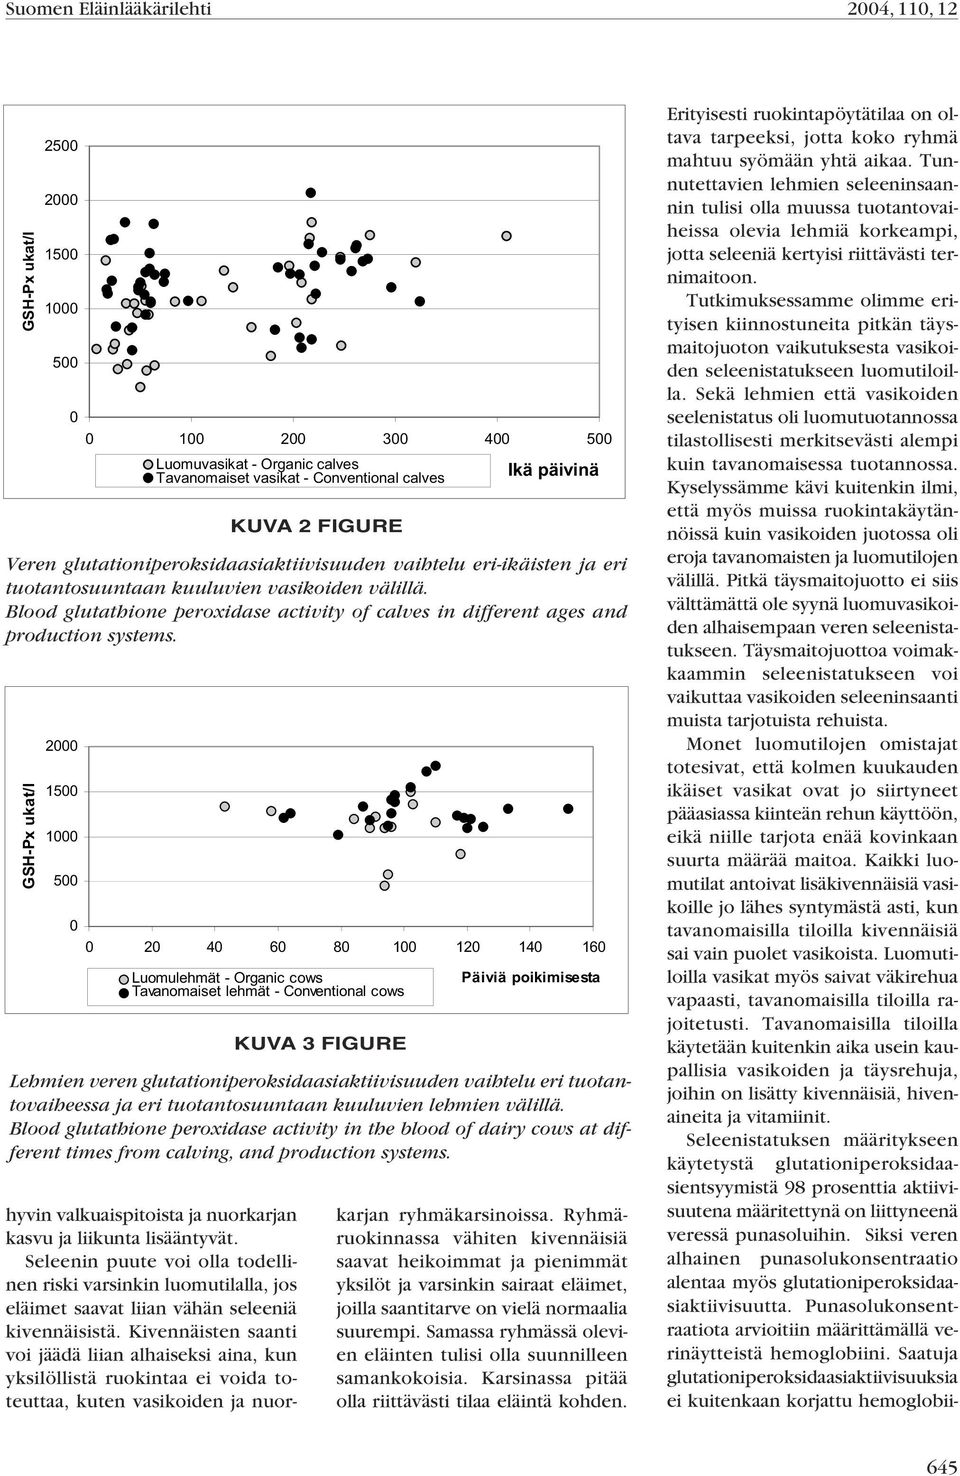 Blood glutathione peroxidase activity of calves in different ages and production systems.